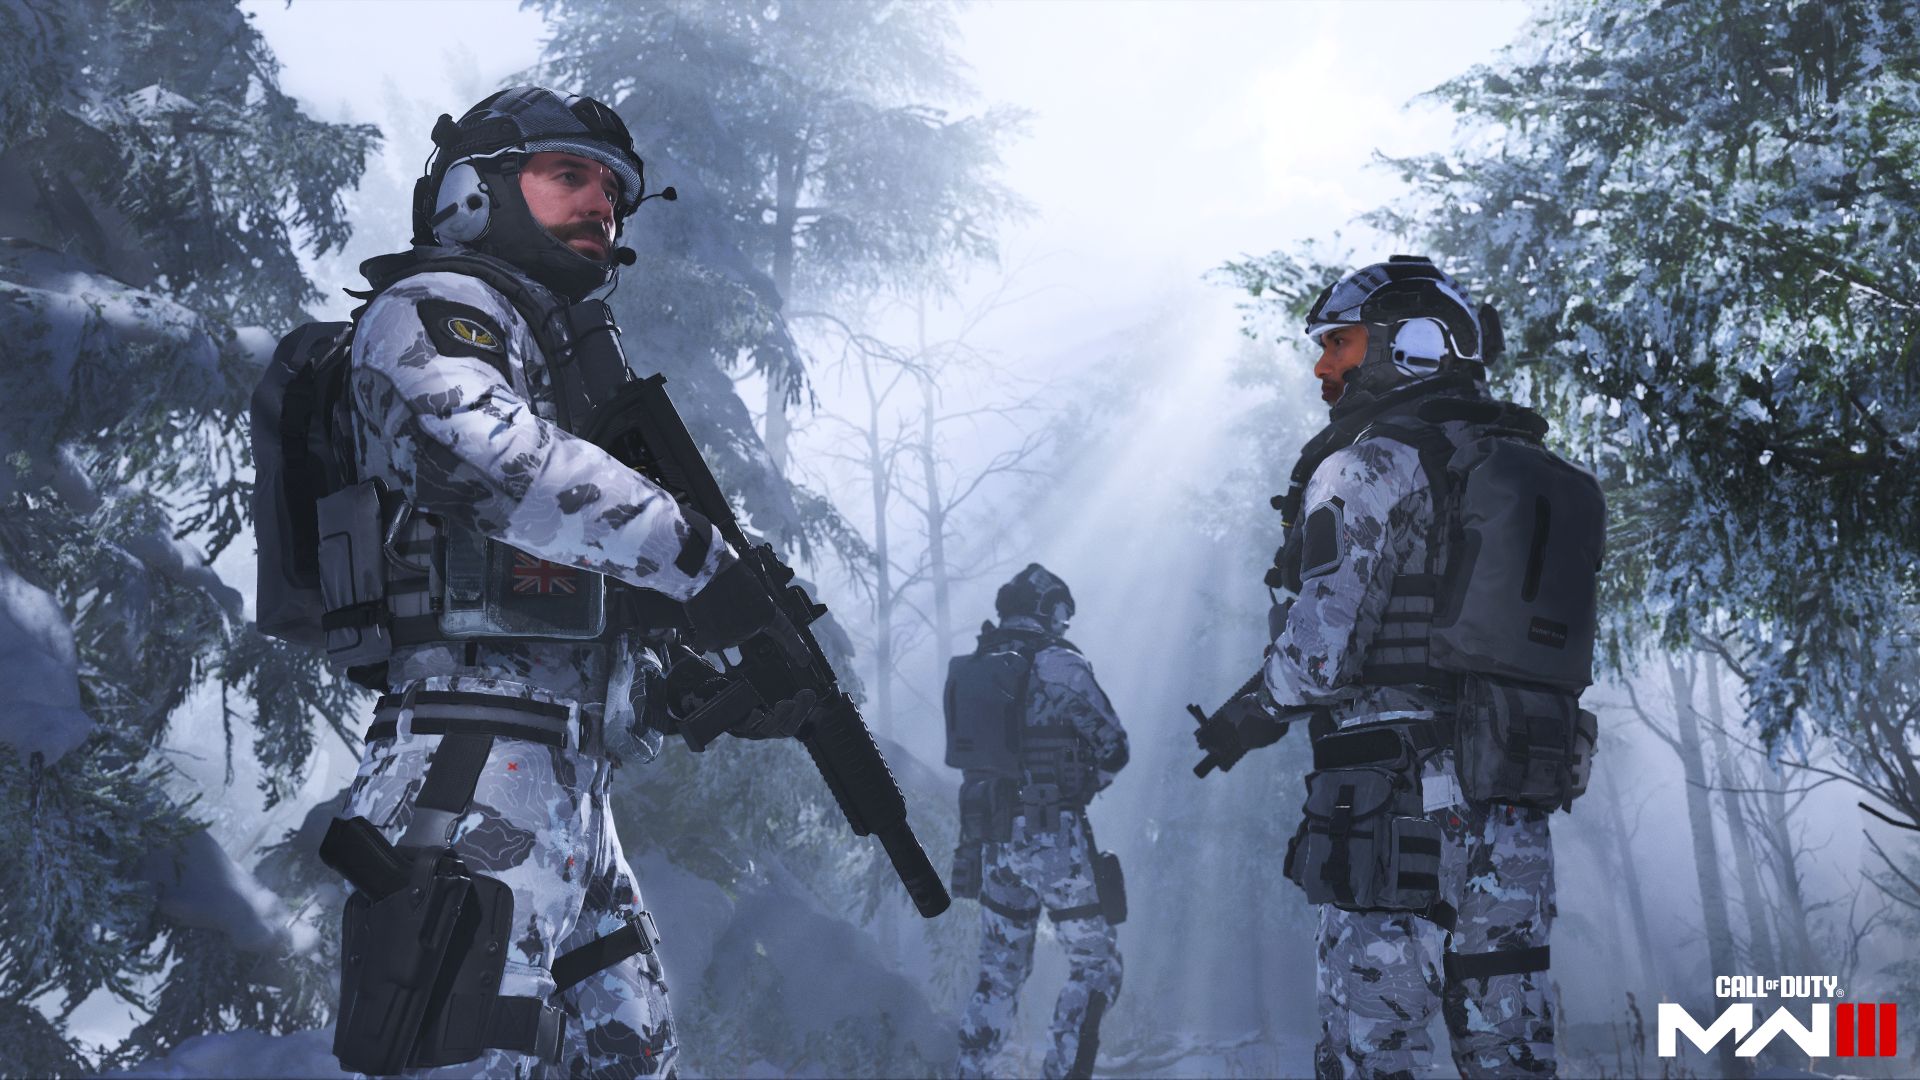 Call of Duty: Modern Warfare III:' How To Buy Online, Availability.